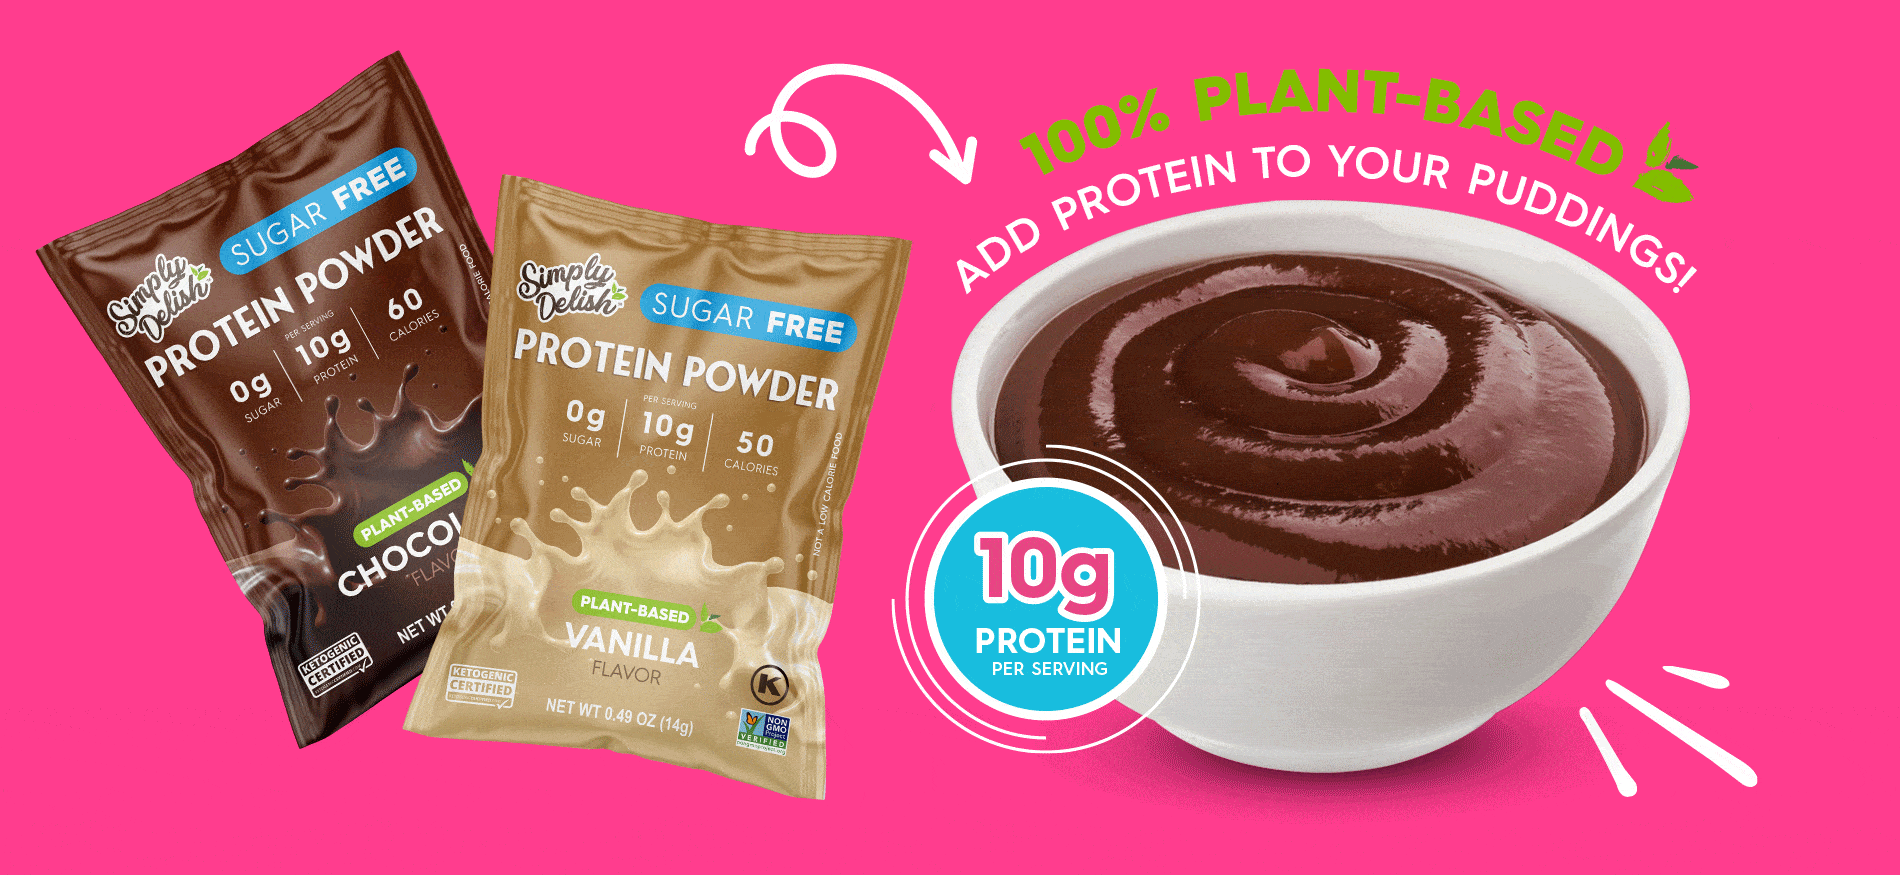 Protein Powder - Turn your dessert into a meal